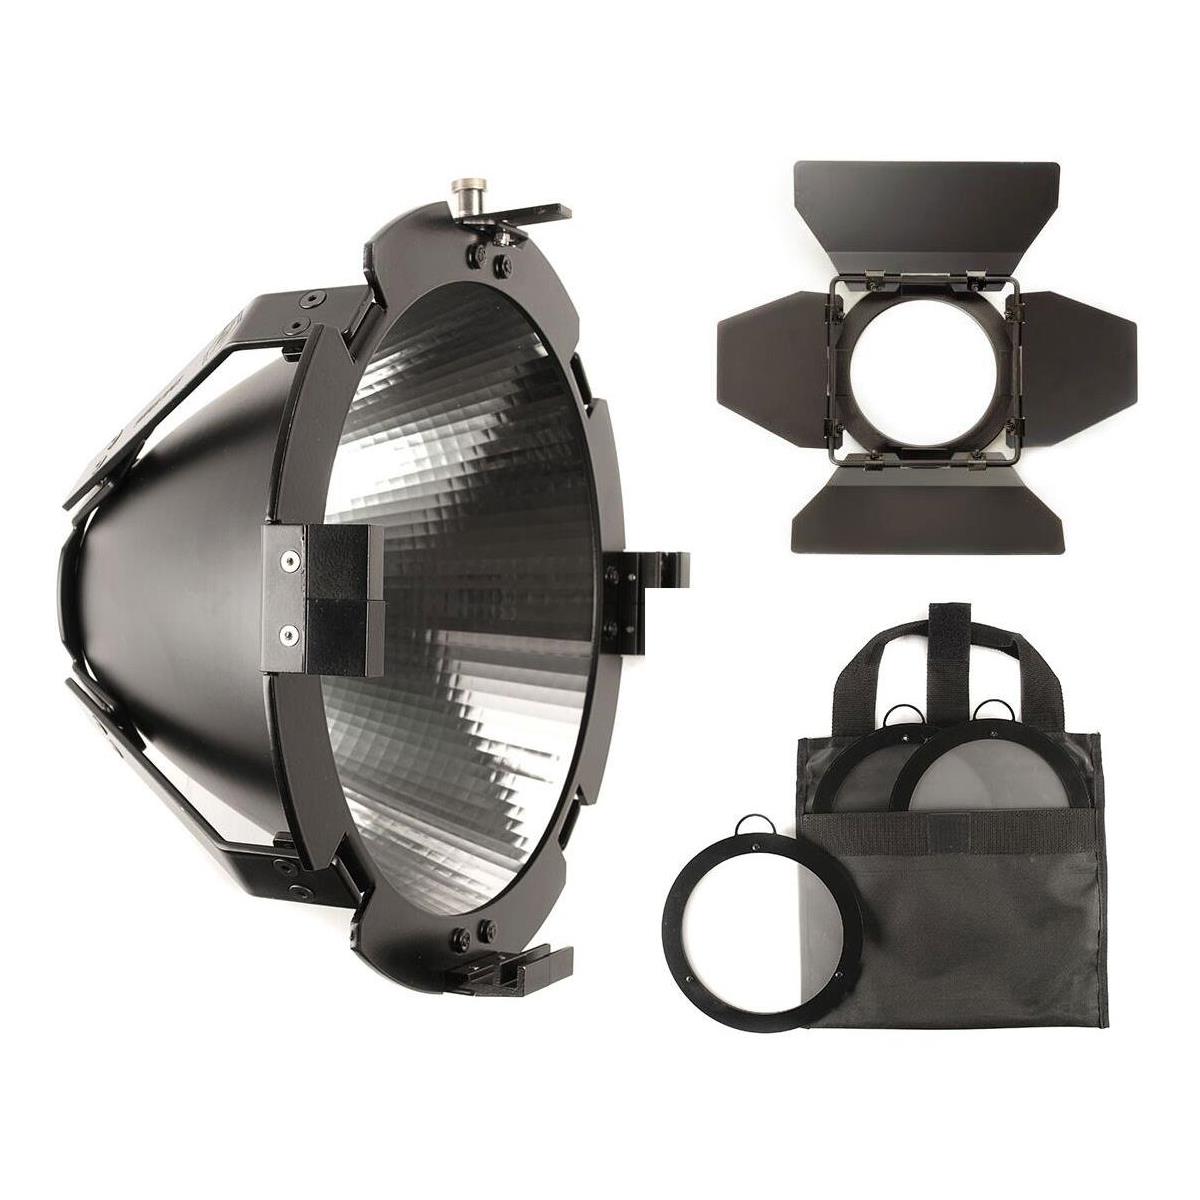 Image of Hive Super Spot Reflector Kit for Bee 50-C